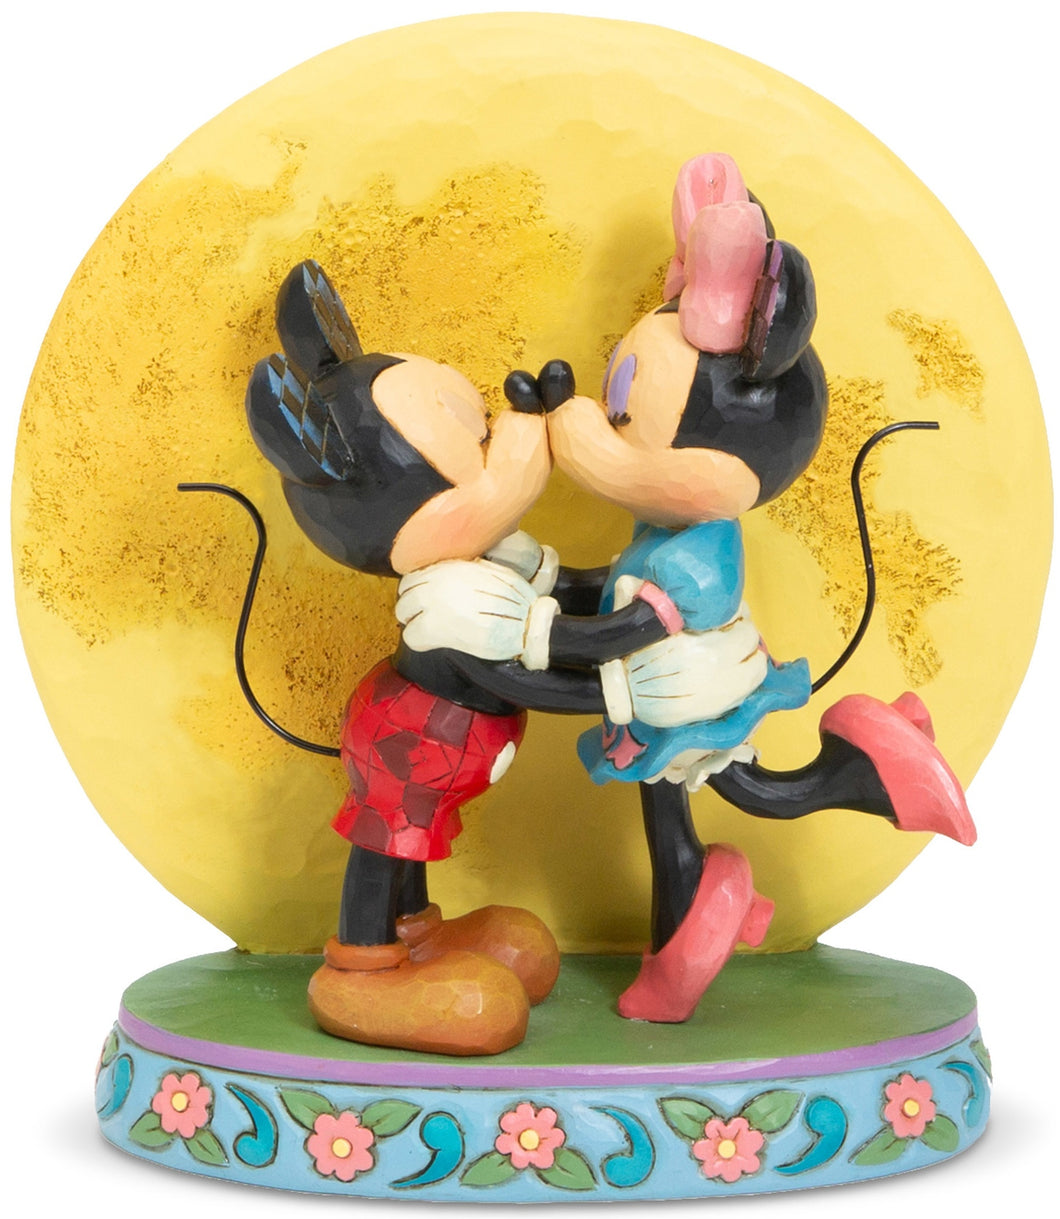 Disney Showcase Collection - 6006208 - Mickie and Minnie 